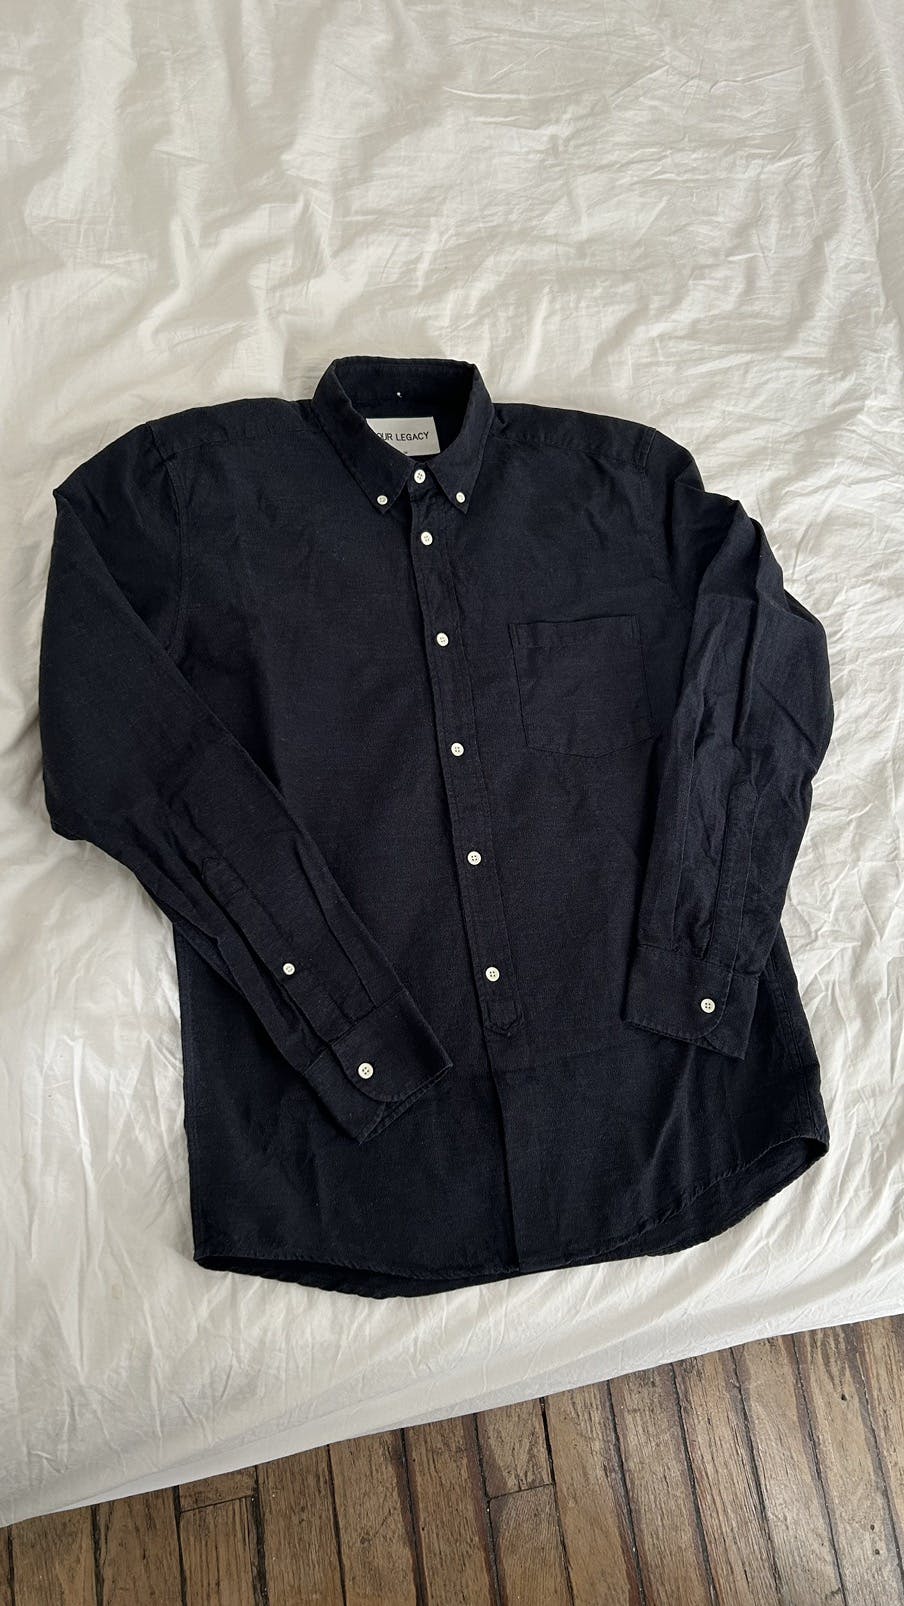 new and never worn . navy black button up shirt . large - 3